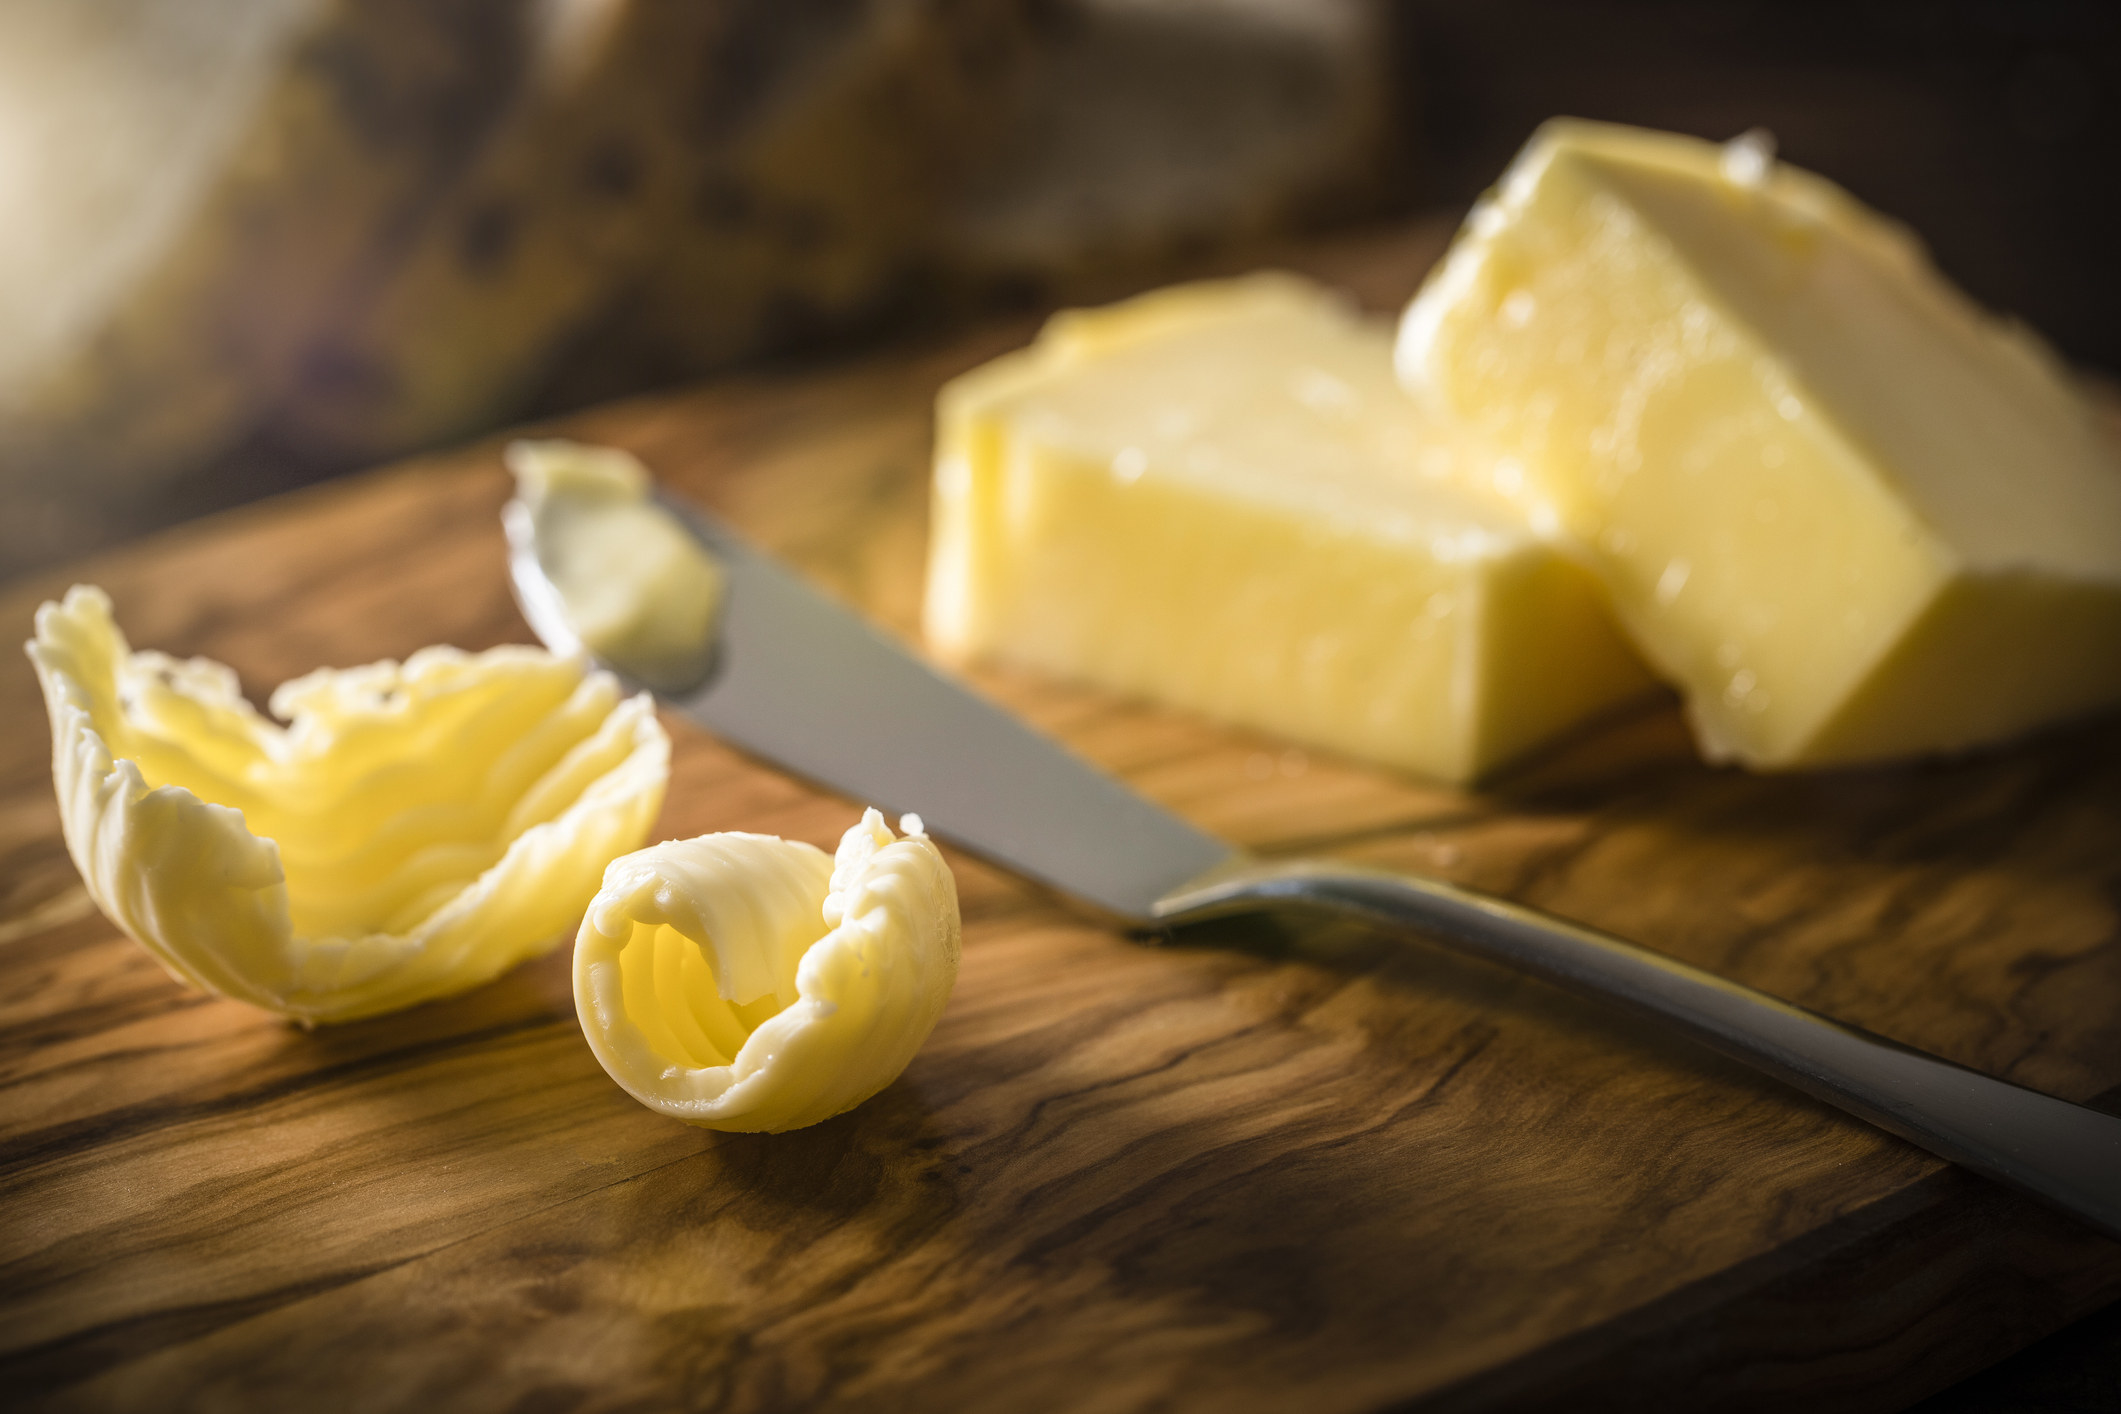 Pats of margarine and butter on a cutting board